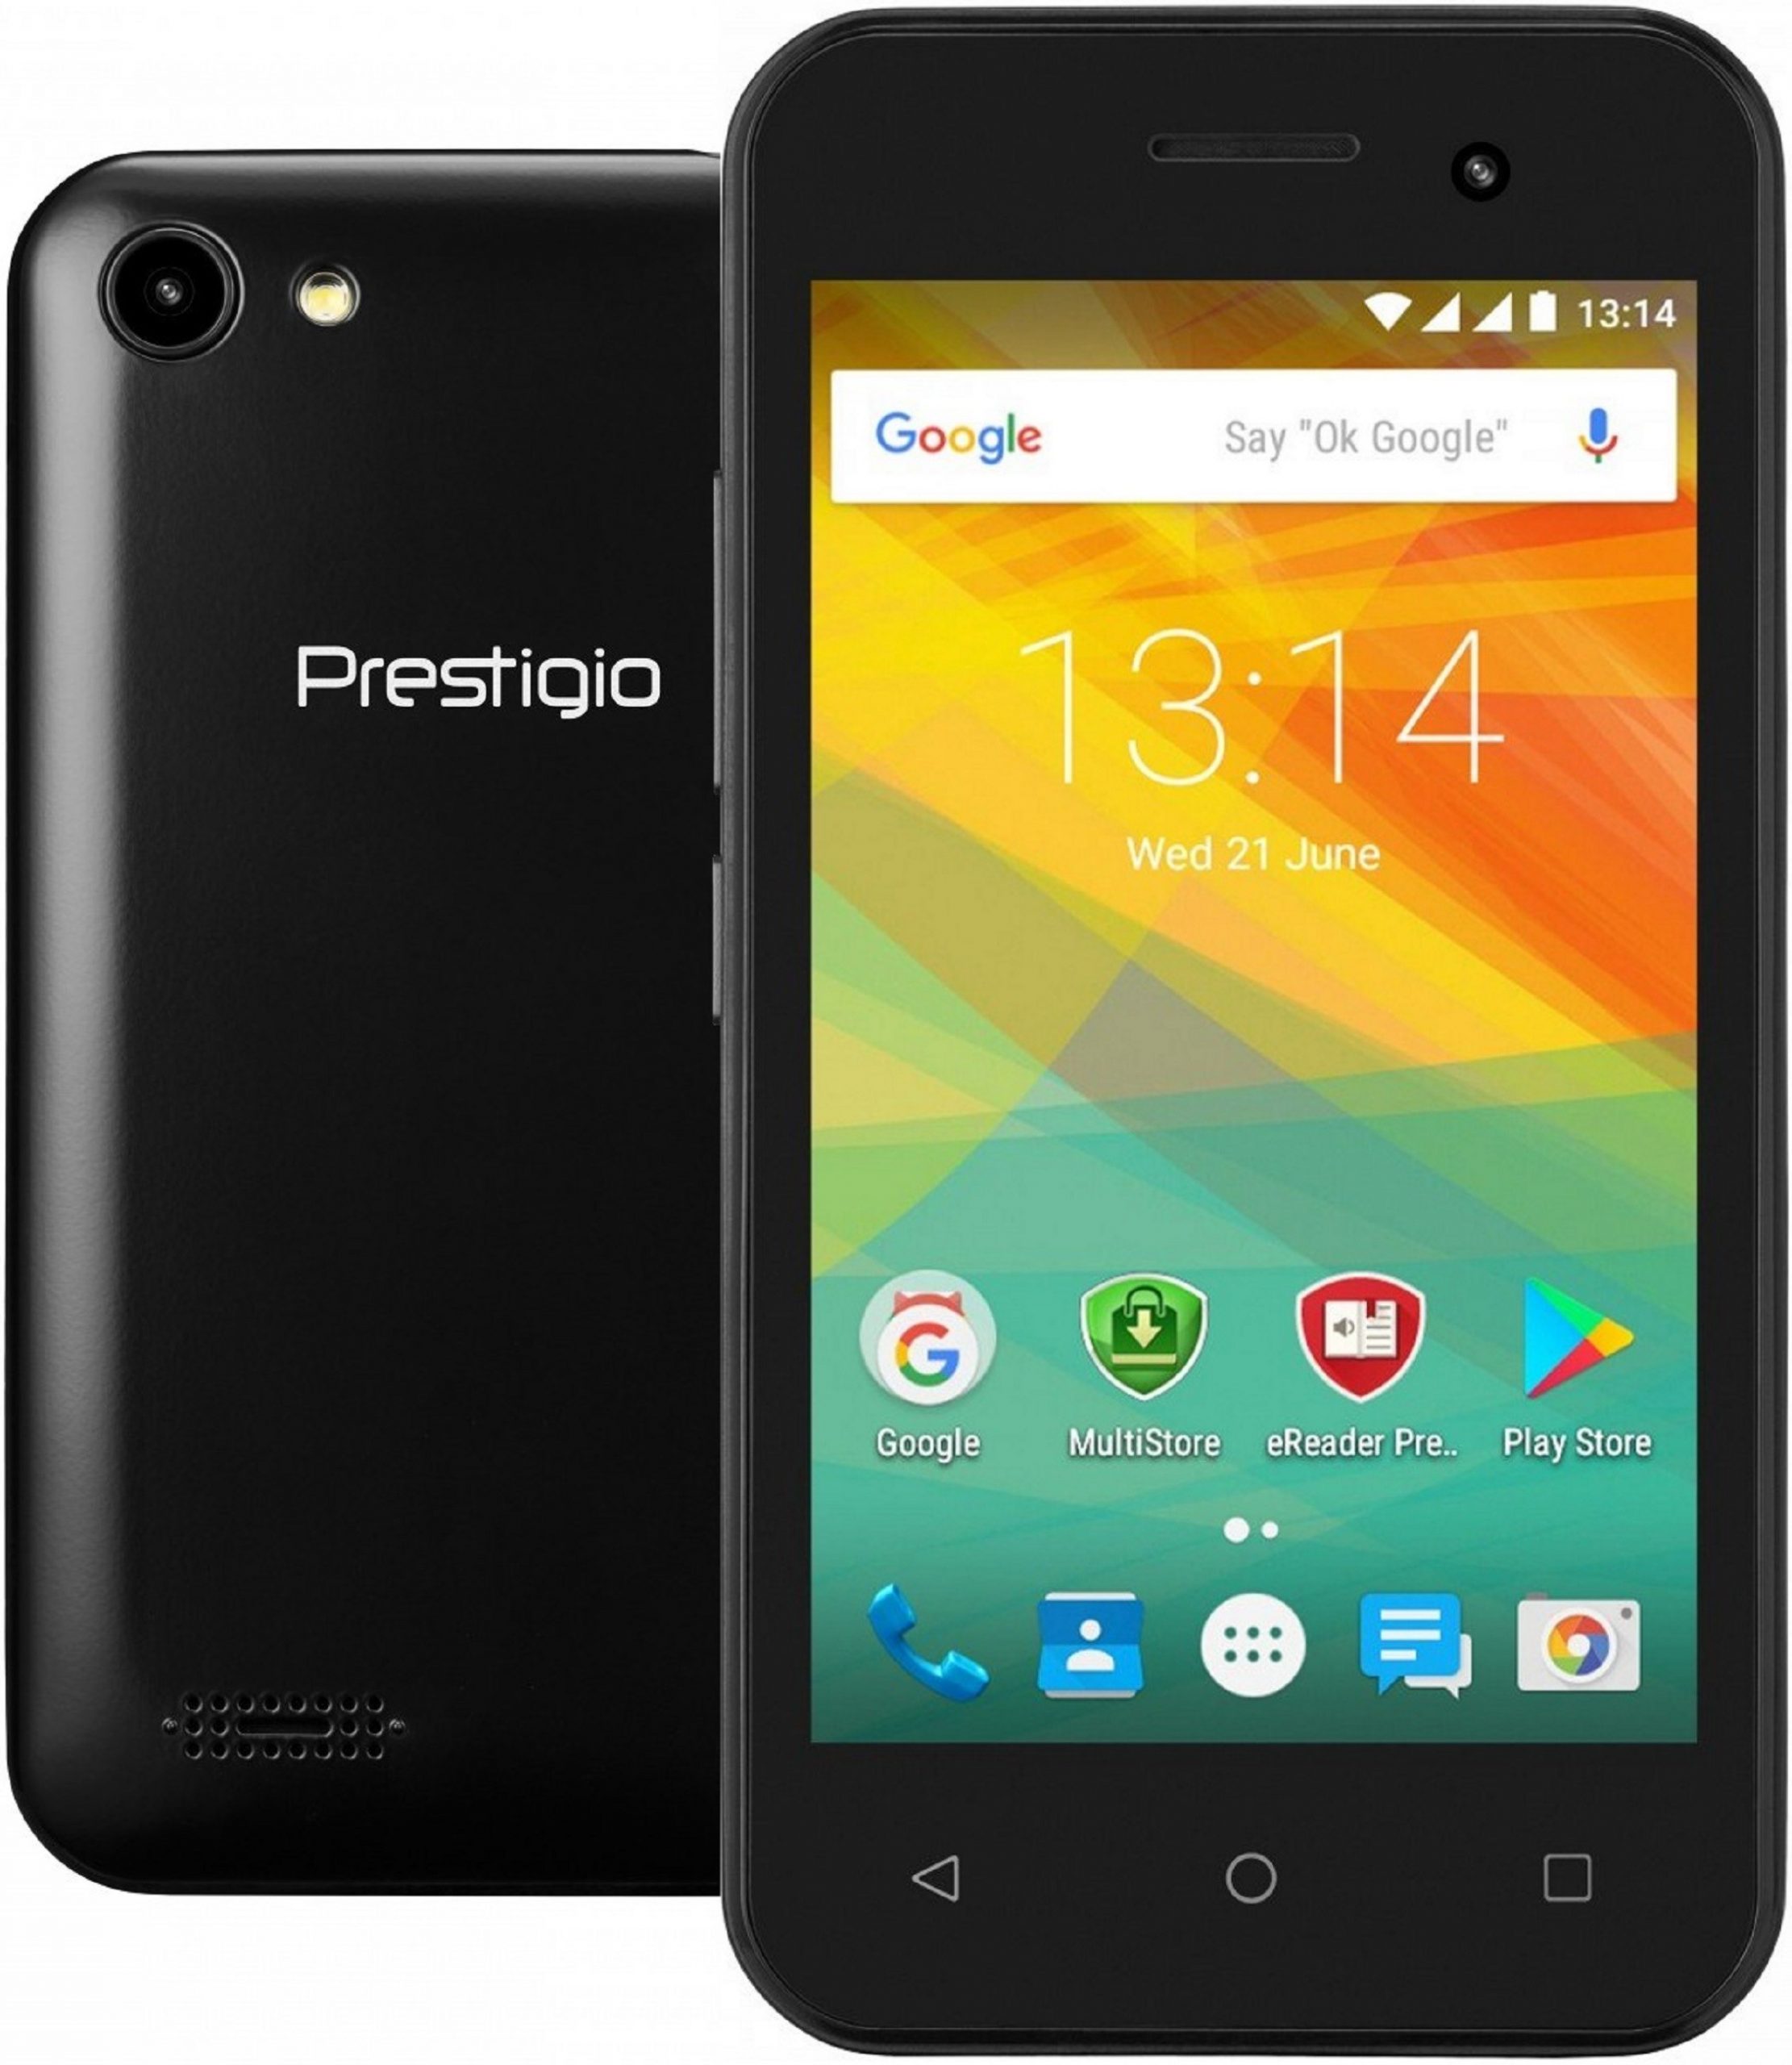 How To Fix Bootloop Or Stuck At Boot Logo Screen And Won’t Restart On PRESTIGIO Wize R3